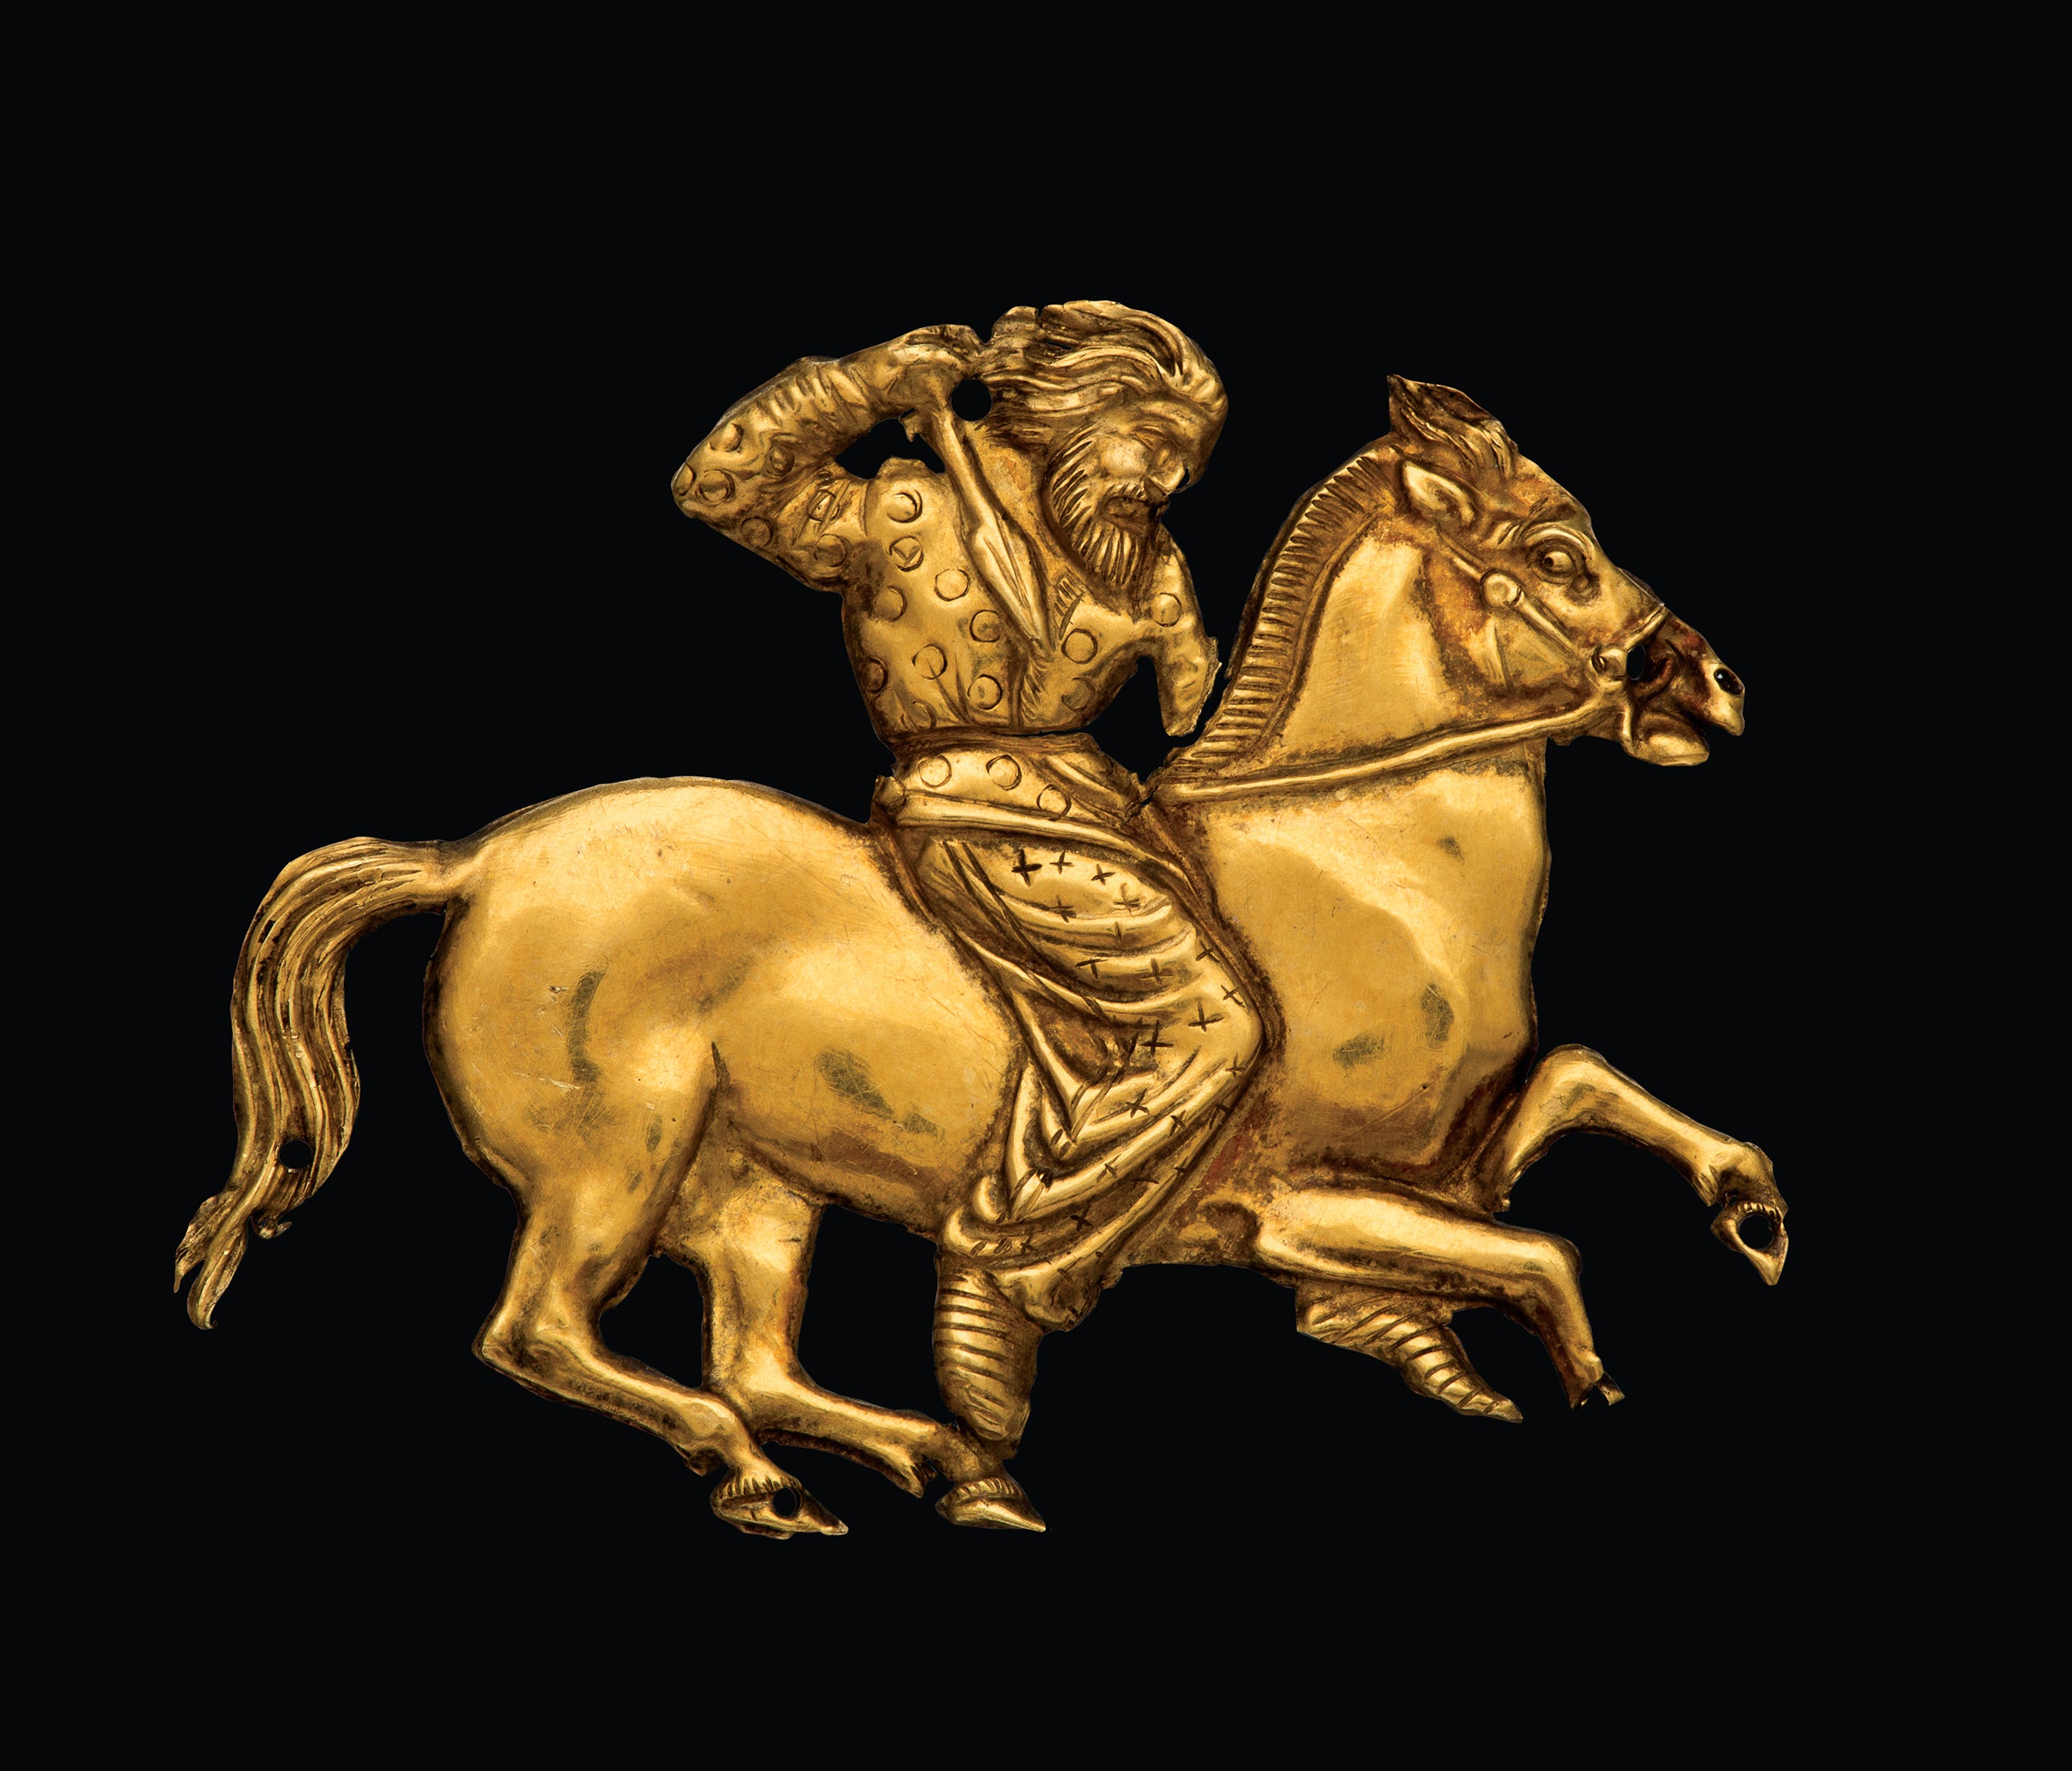 A gold plaque depicting a Scythian rider with a spear in his hand. A major loan came from the State Hermitage Museum in St. Petersburg, along with loans from several other museums, that contributed to the 200 objects in the British Museum exhibition,